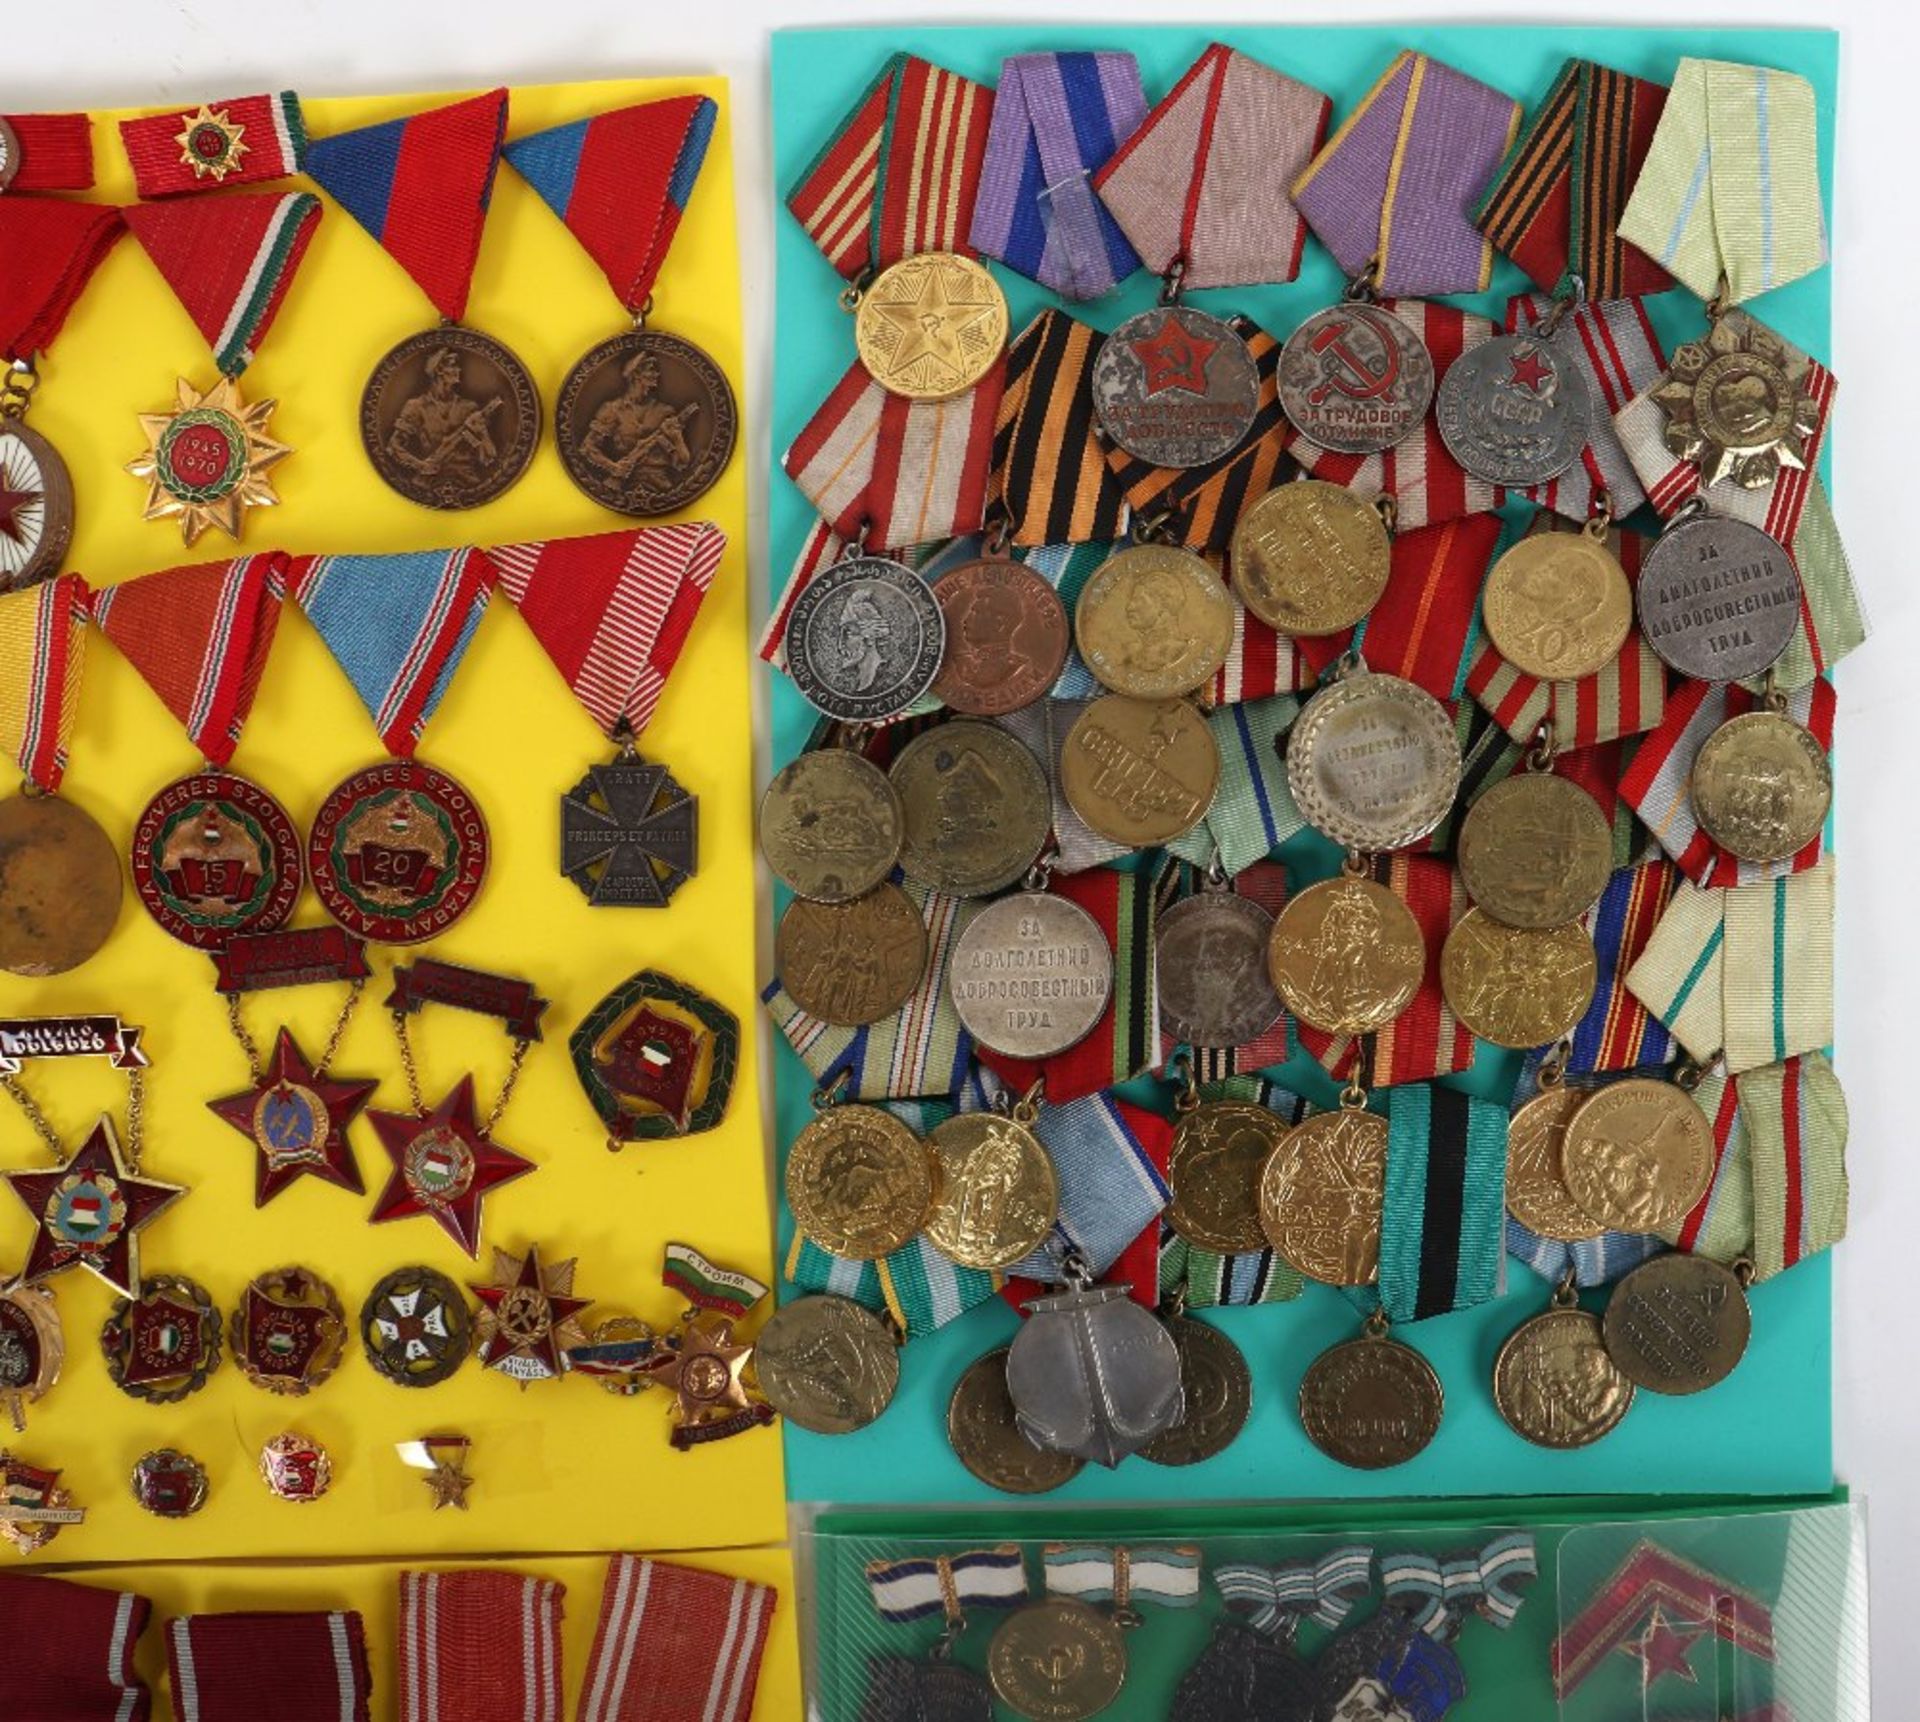 Large Collection of Soviet Russian, Polish Republic & Eastern Bloc Nations Medals and Badges - Image 4 of 9